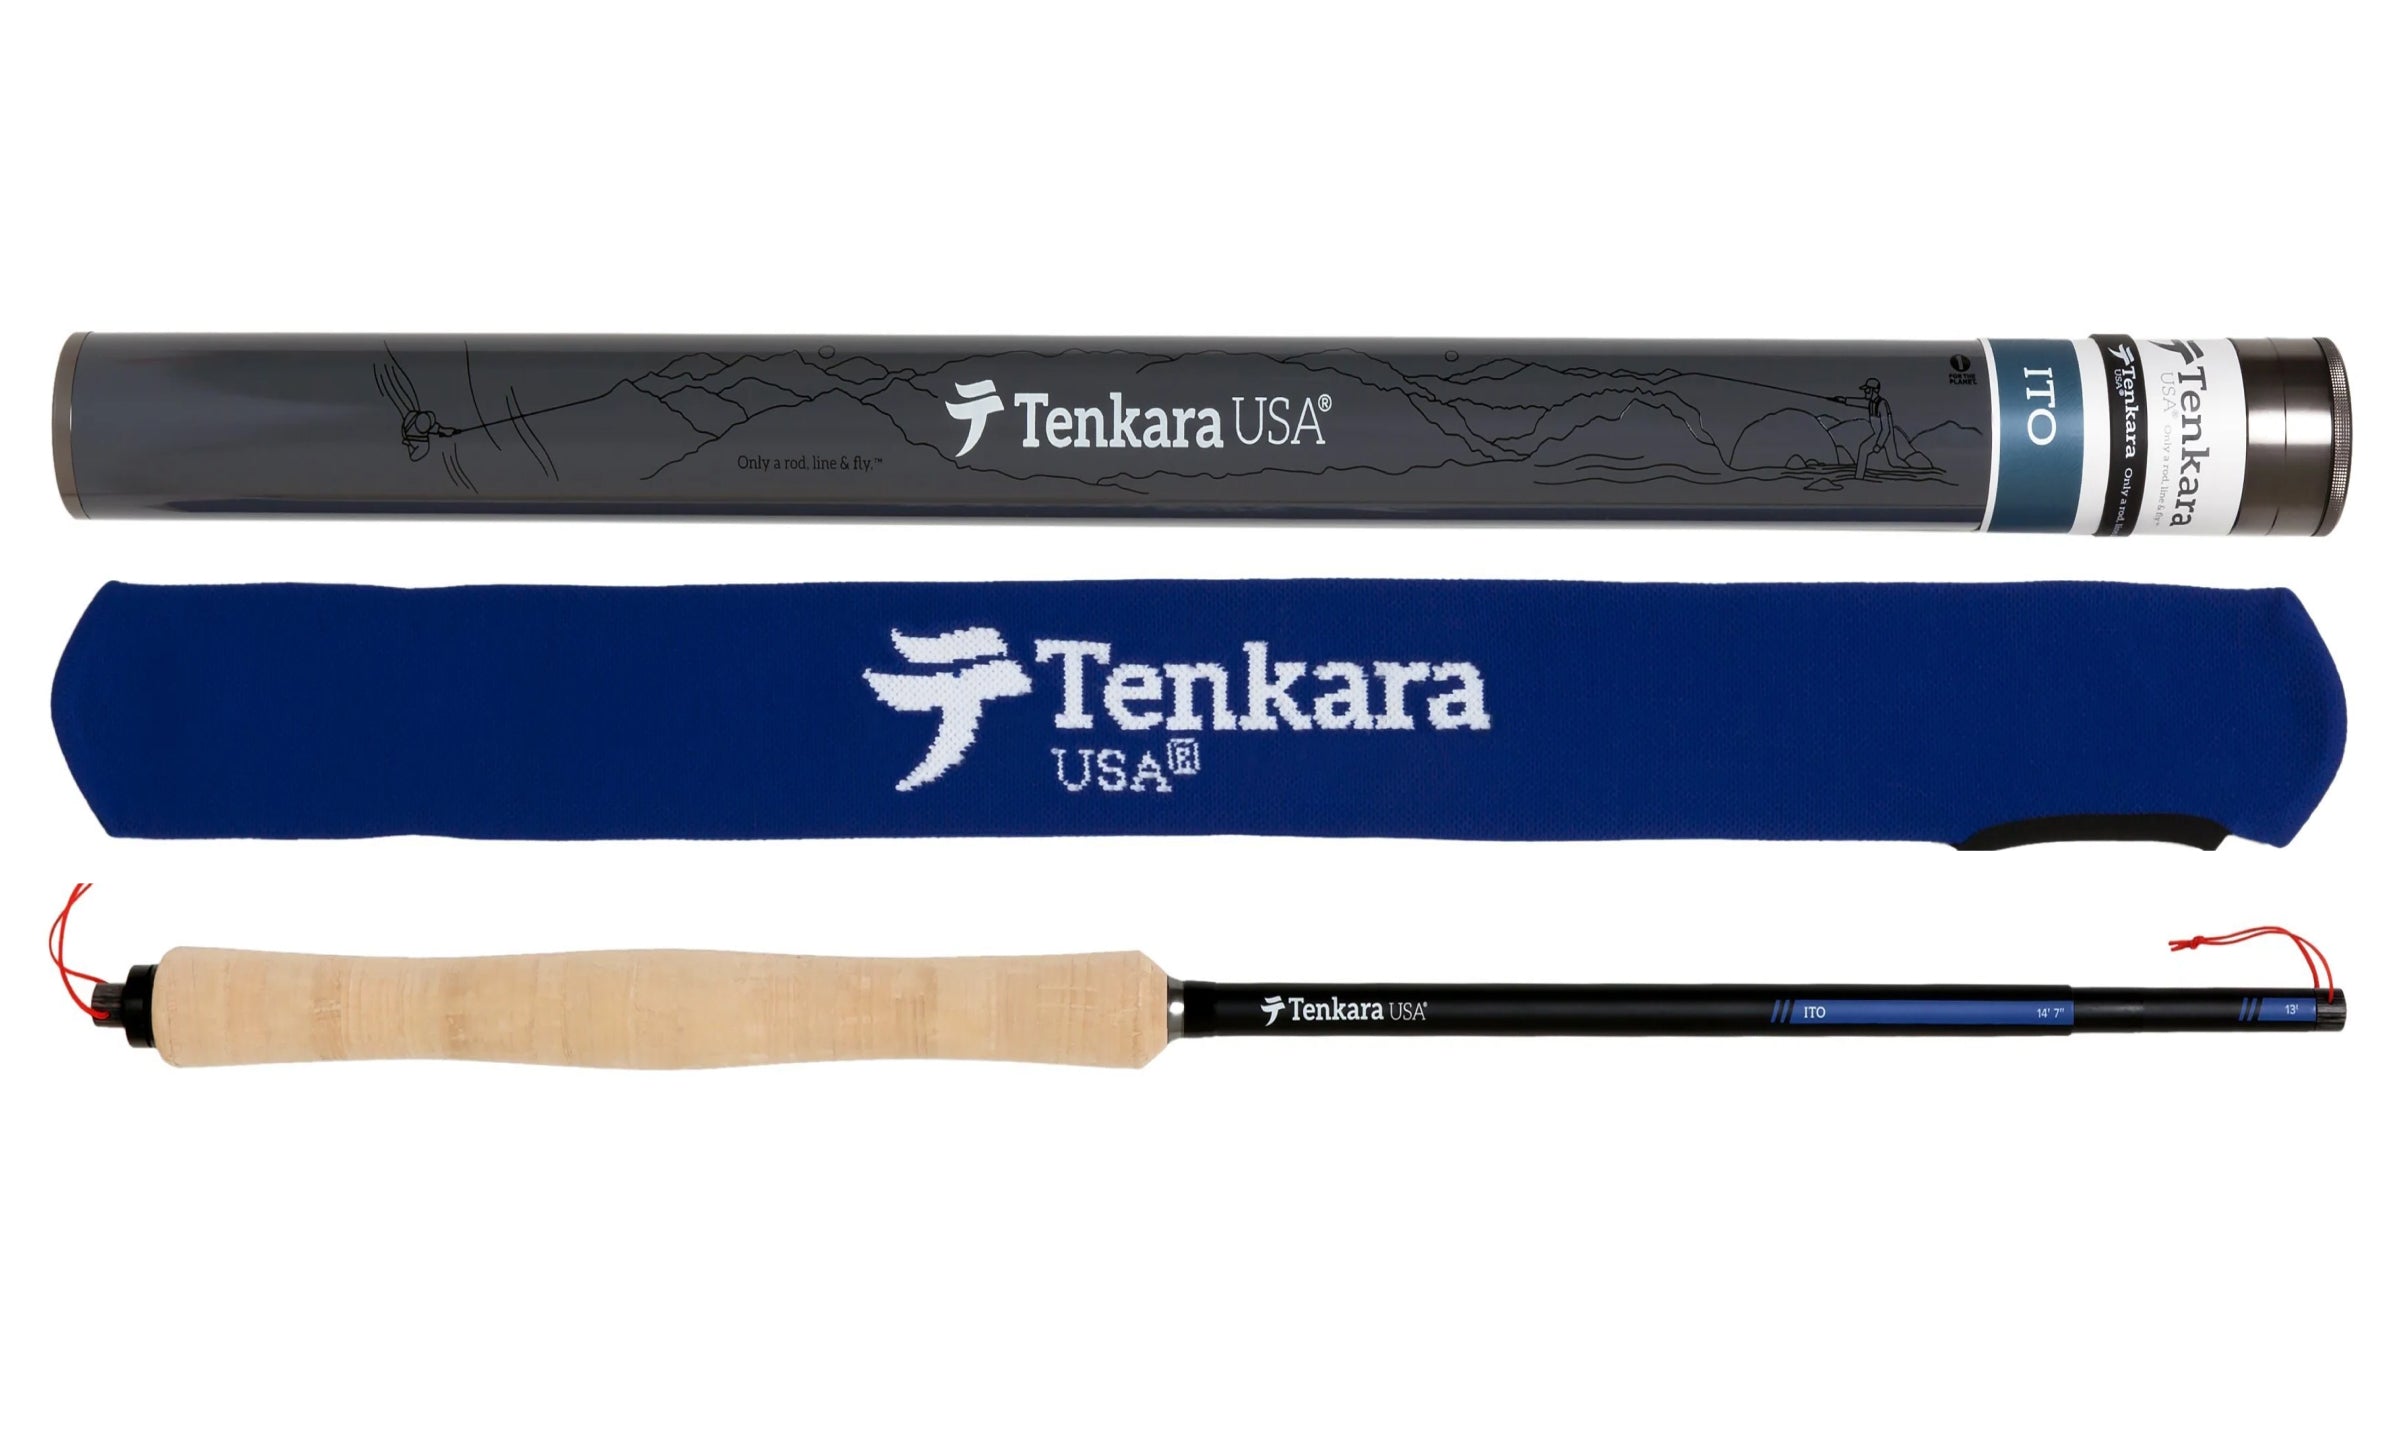 Tenkara Rods - The Most Versatile & High Quality Rods Available